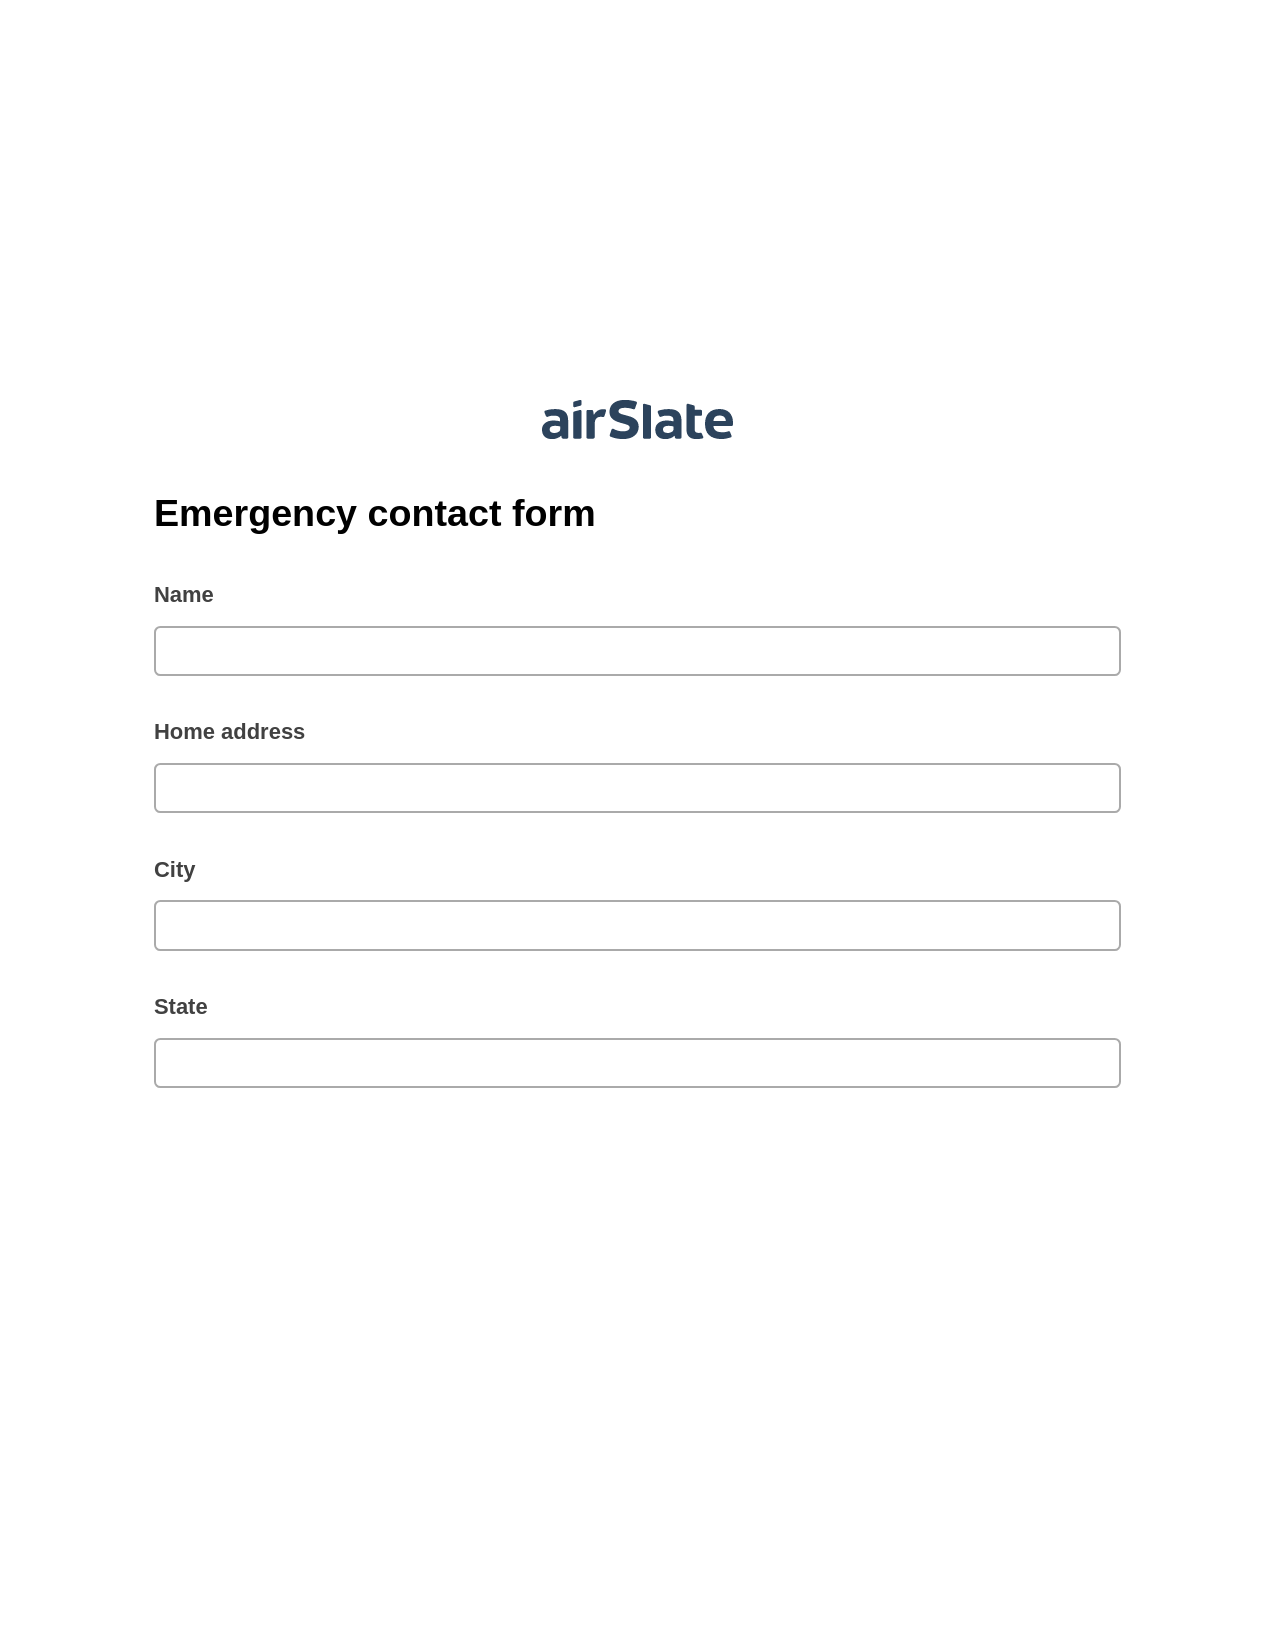 Emergency contact form Pre-fill Dropdown from Airtable, Remove Slate Bot, Email Notification Postfinish Bot